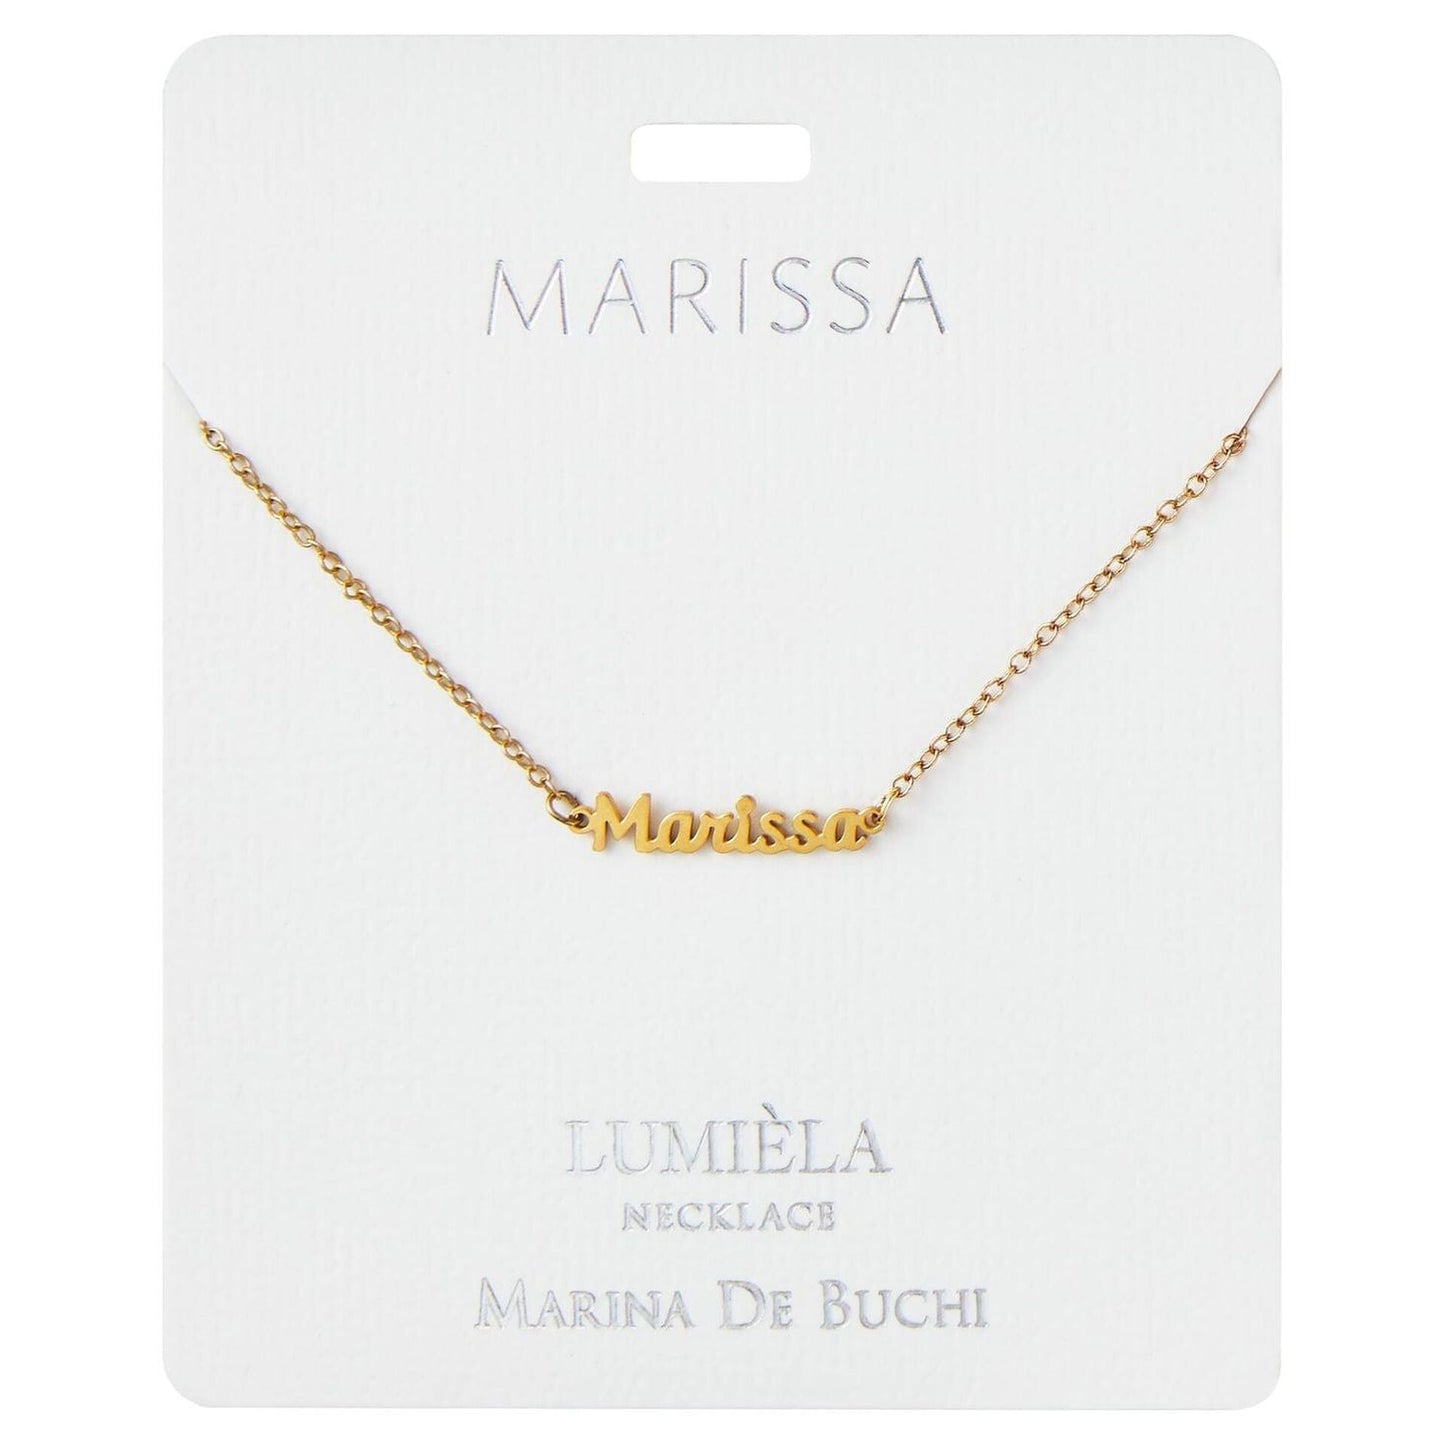 Lumiela Personalized Nameplate Mia Necklace in Gold Tone